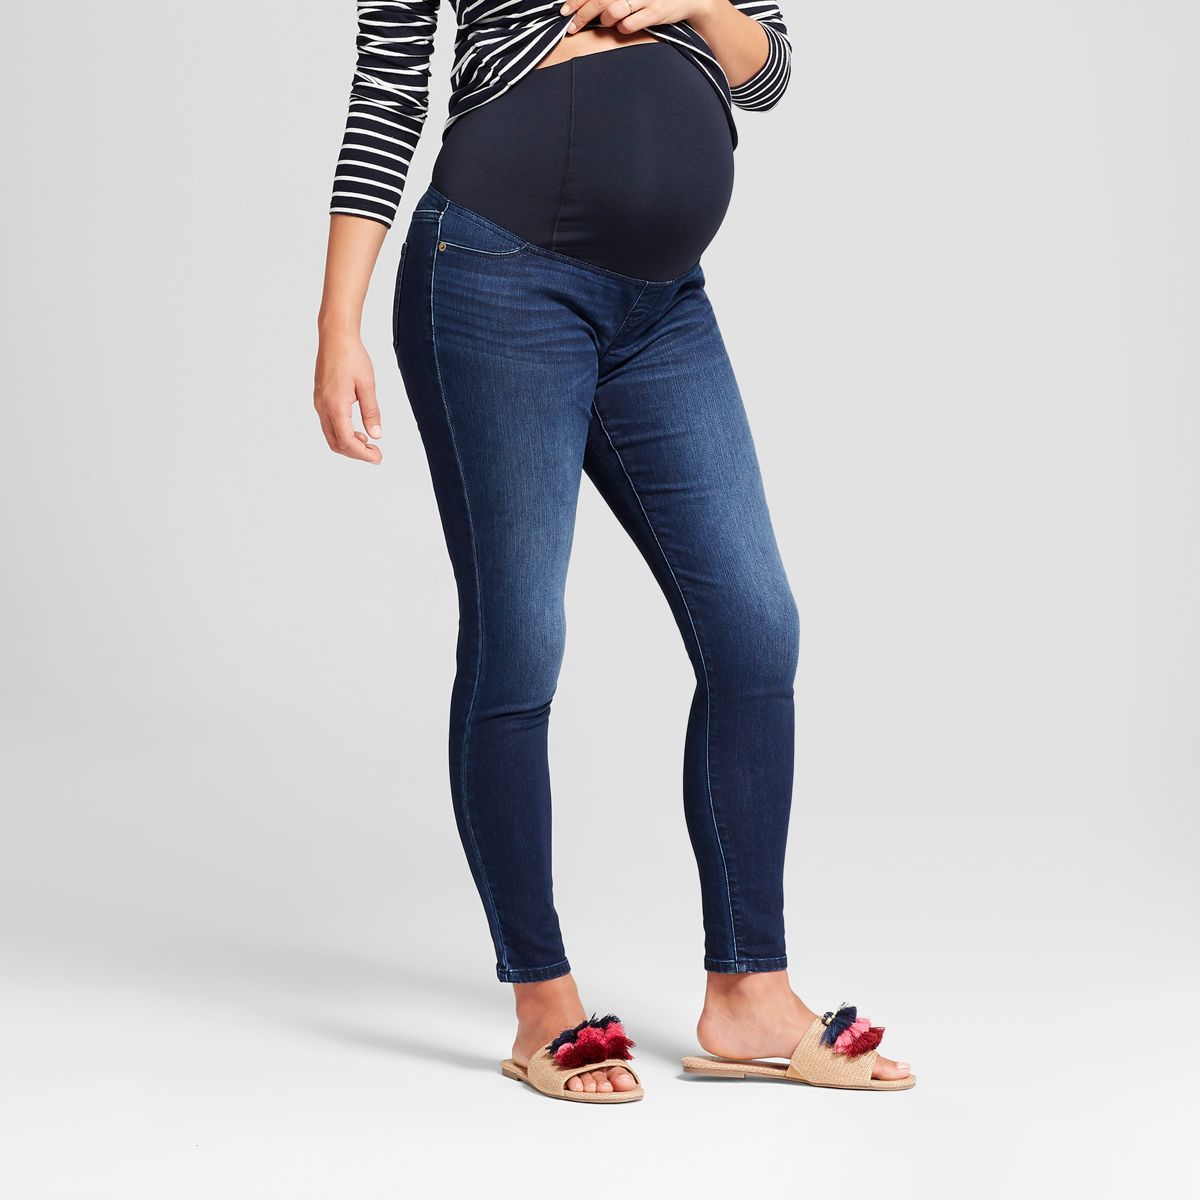 Over the Belly Skinny Maternity Jeans - Isabel Maternity by Ingrid & Isabel™ Dark Wash | Target